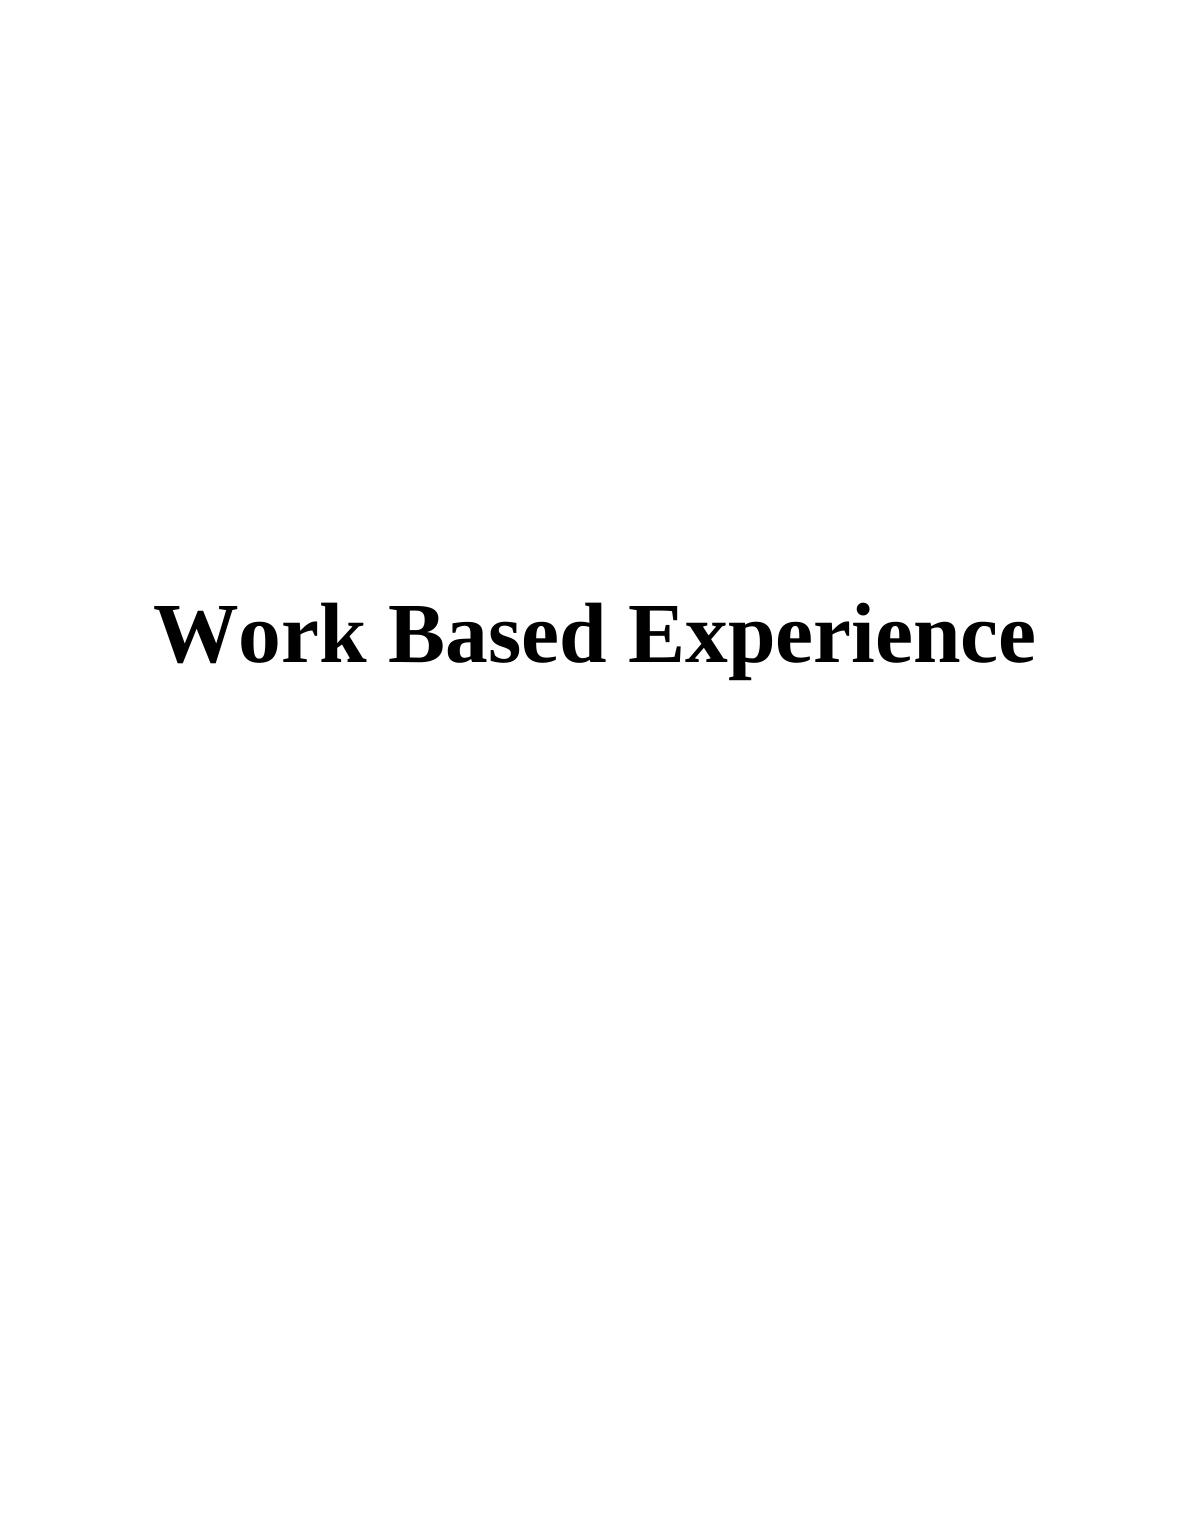 Work Based Experience- Doc_1